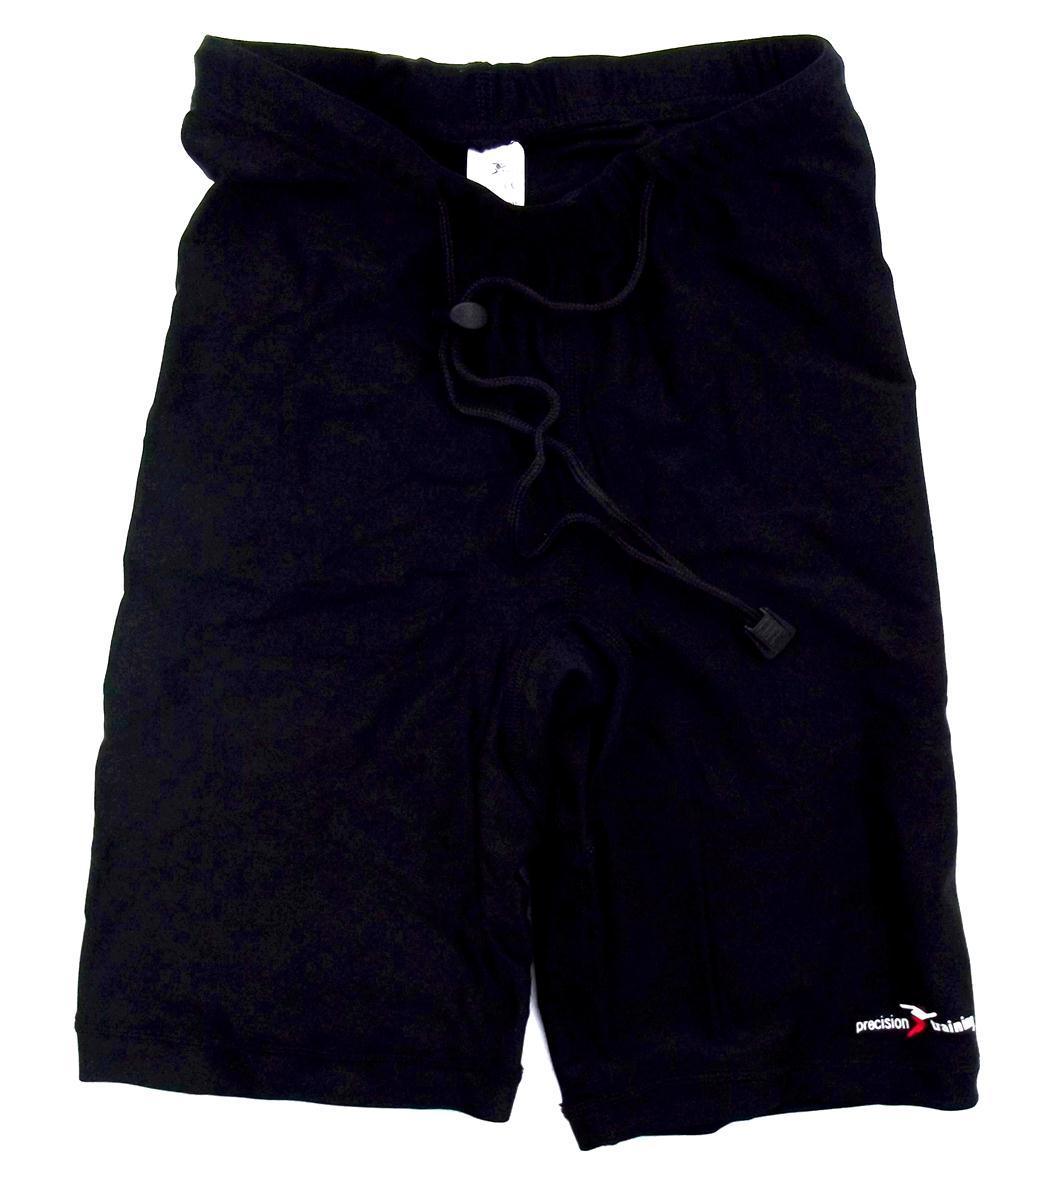 Rugby Heaven Precision Training Compression Kids Black Baselayer Shorts - www.rugby-heaven.co.uk